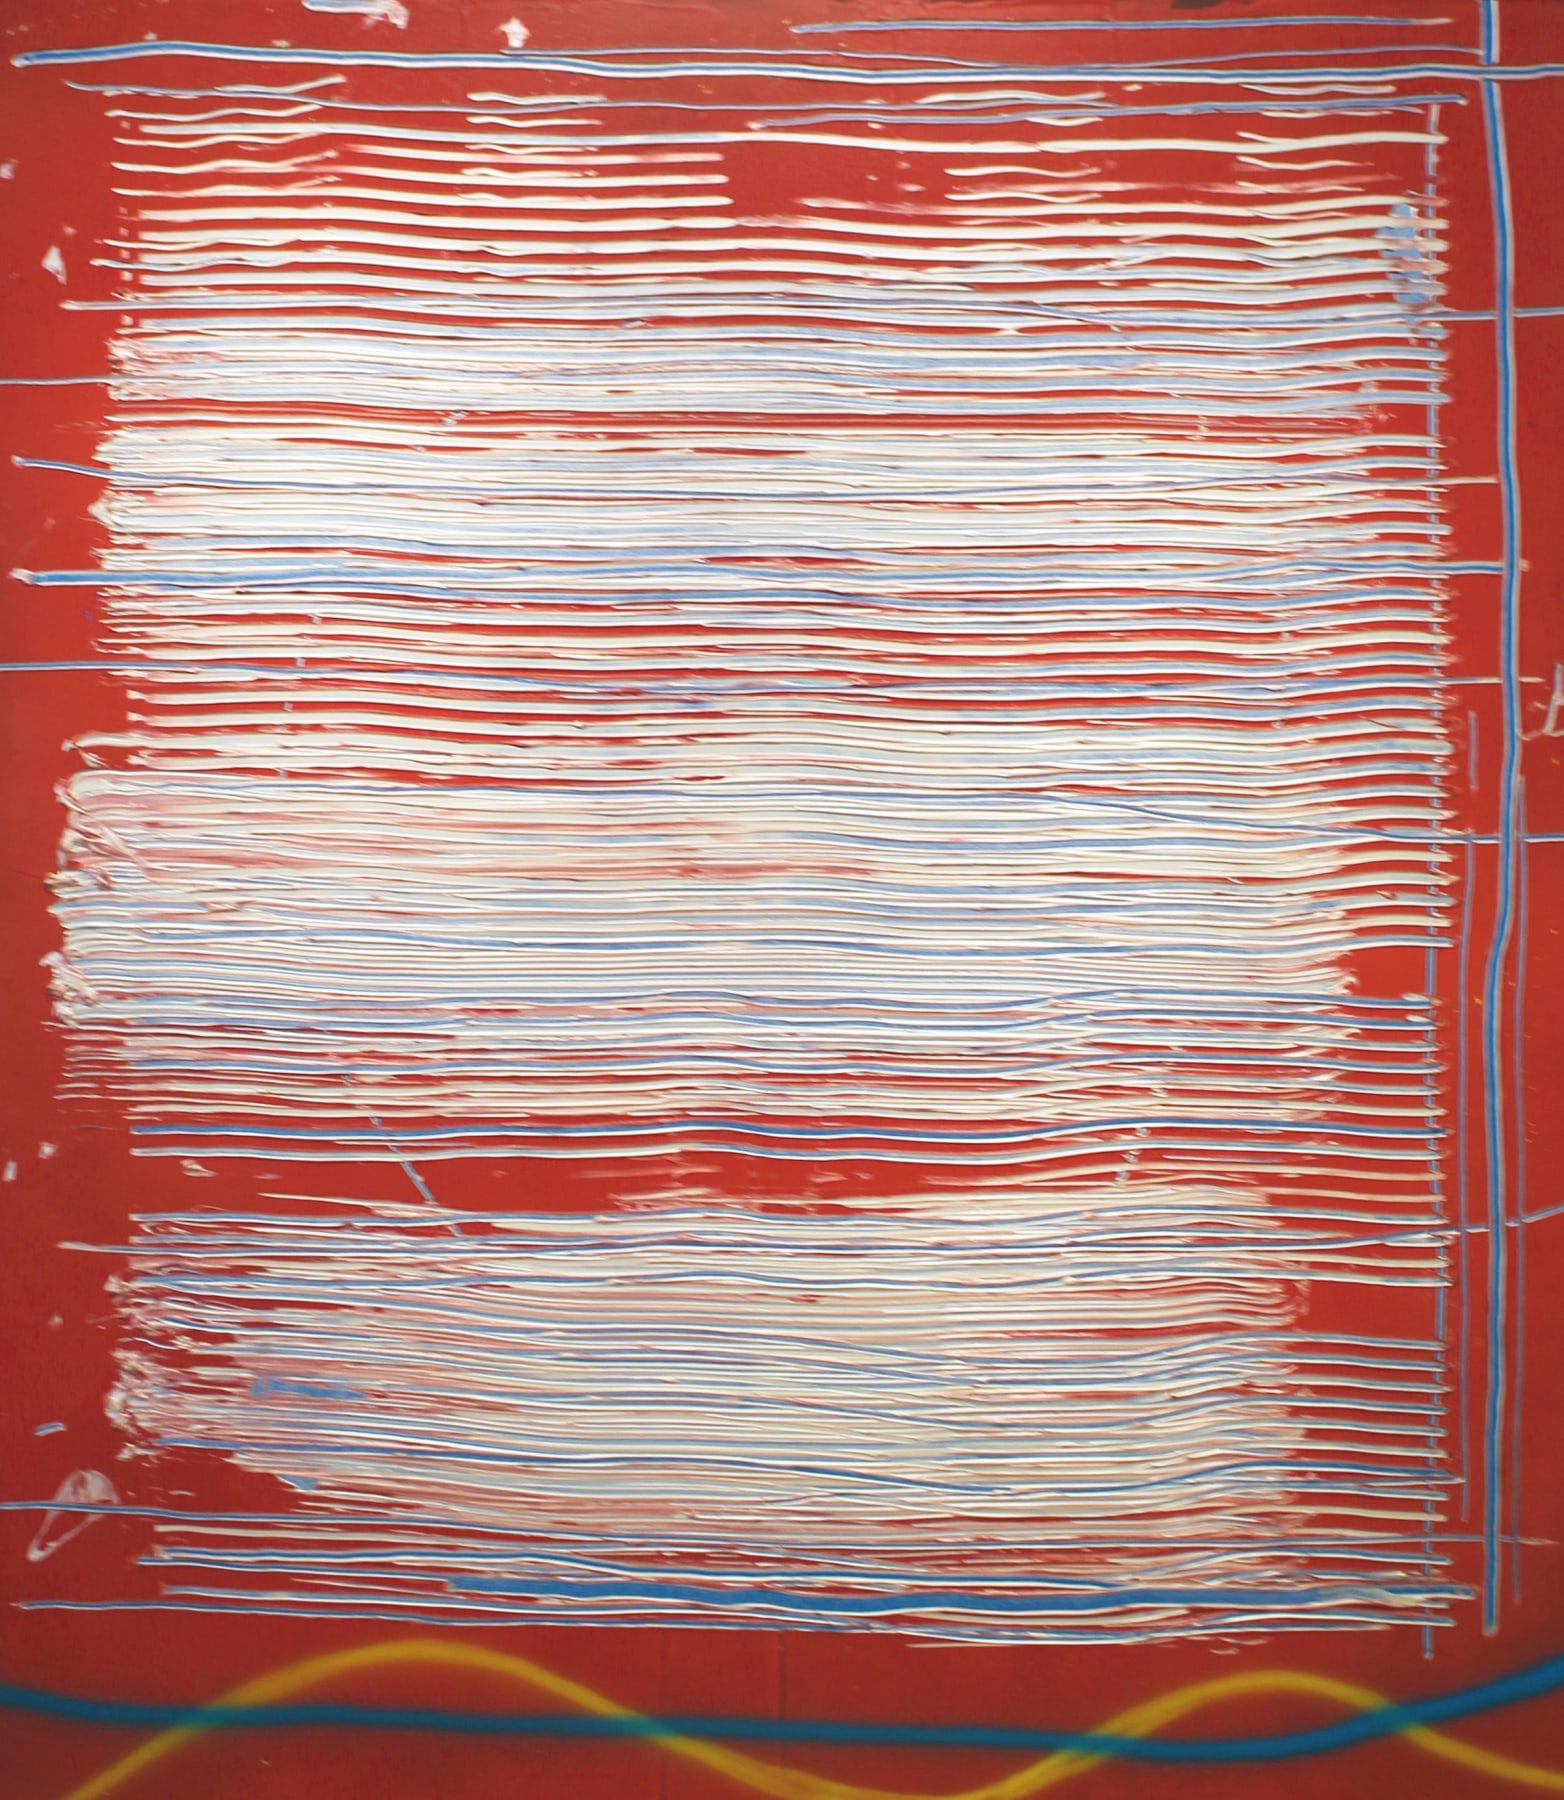 Liberty, 1987 Acrylic on canvas 80 x 68 inches